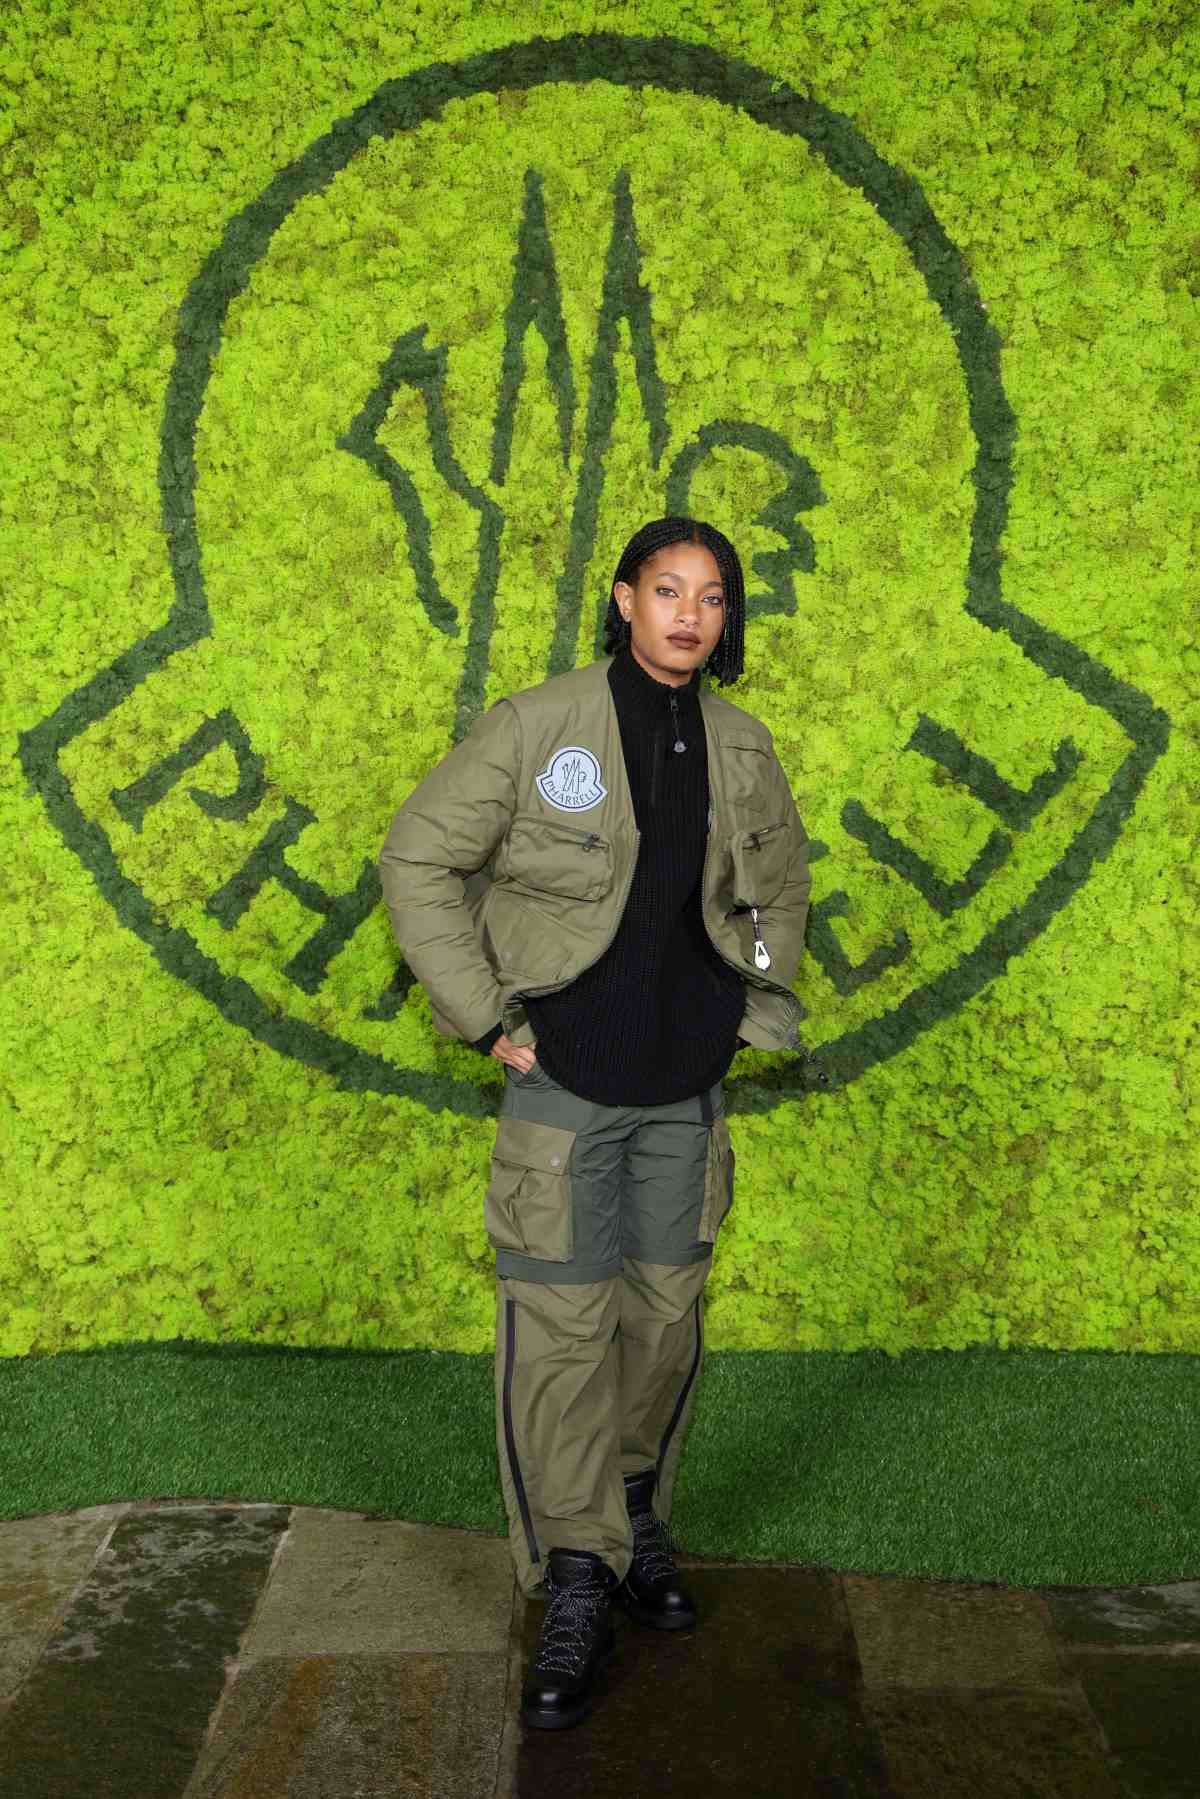 Moncler Celebrated The Launch Of The New Moncler X Pharrell Williams Collection